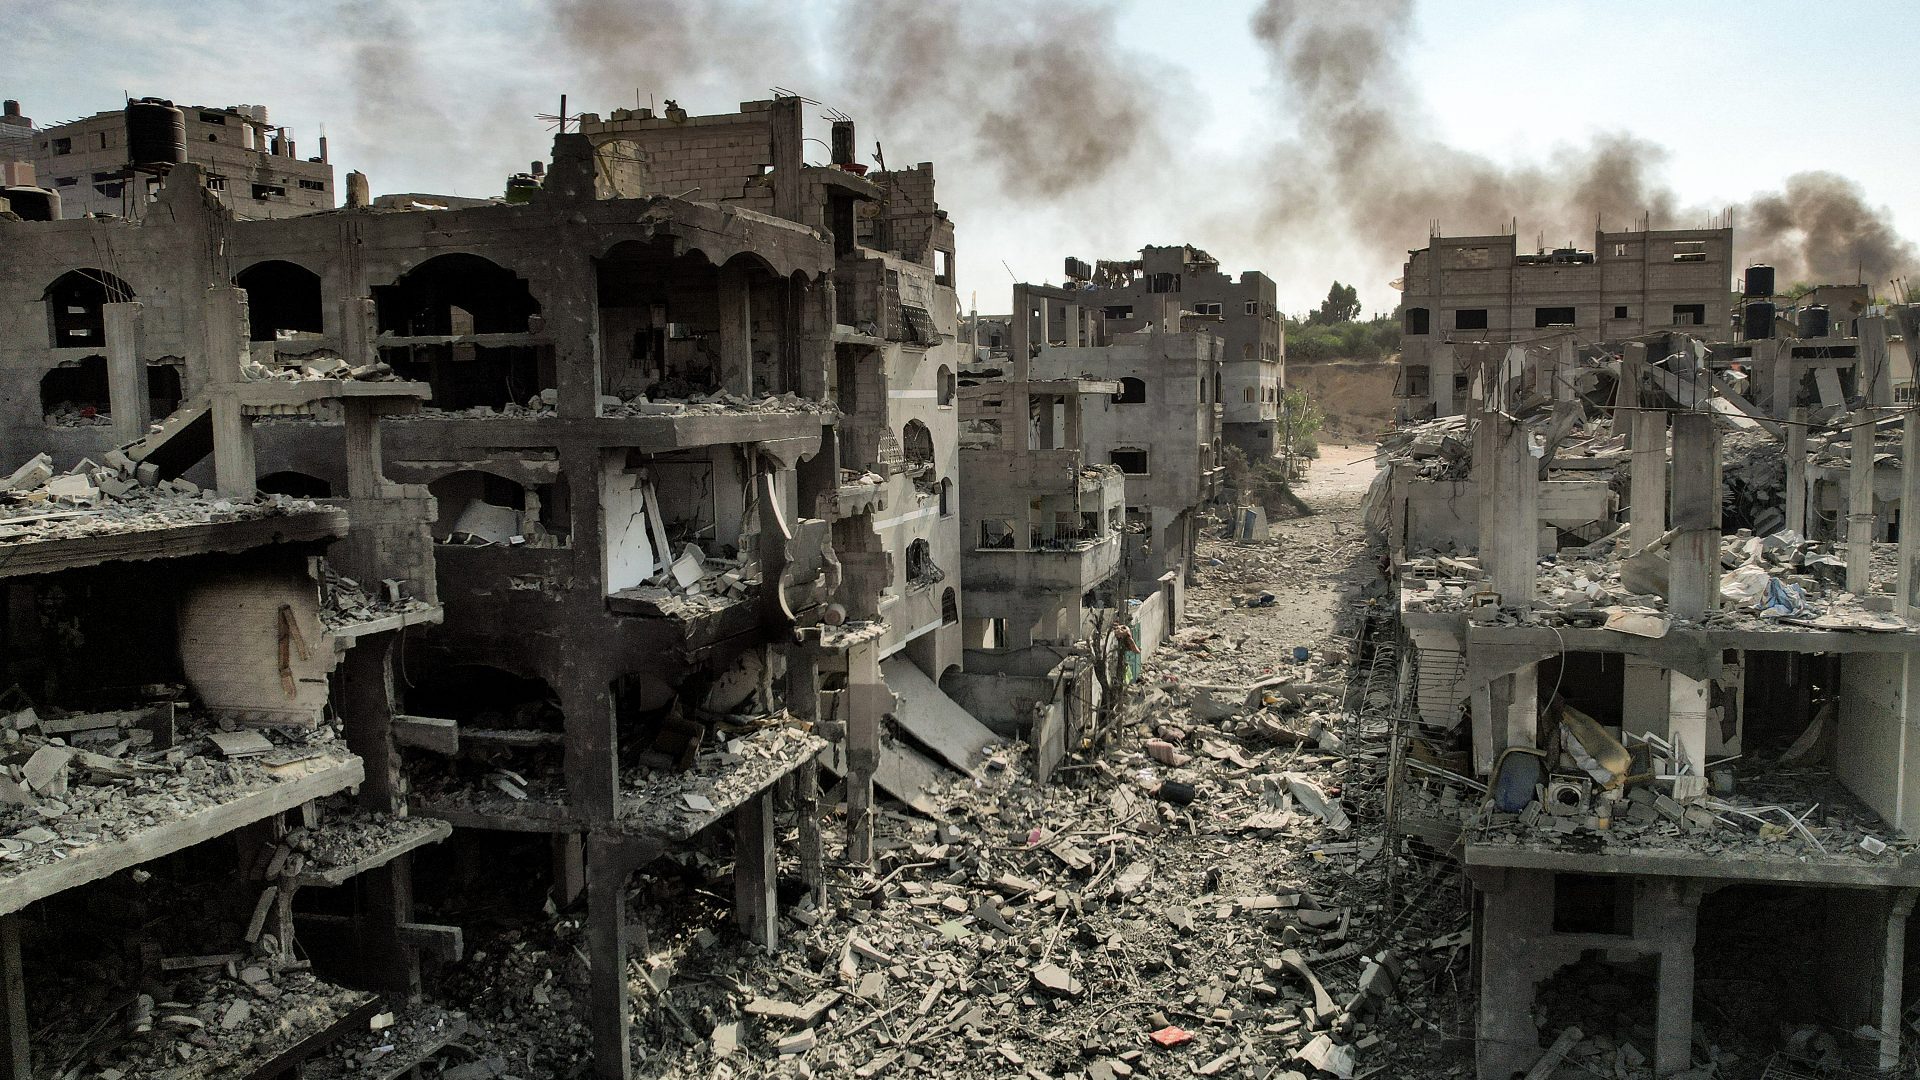 Buildings destroyed by Israeli air strikes in Gaza City. Photo: Yahya Hassouna/AFP/Getty